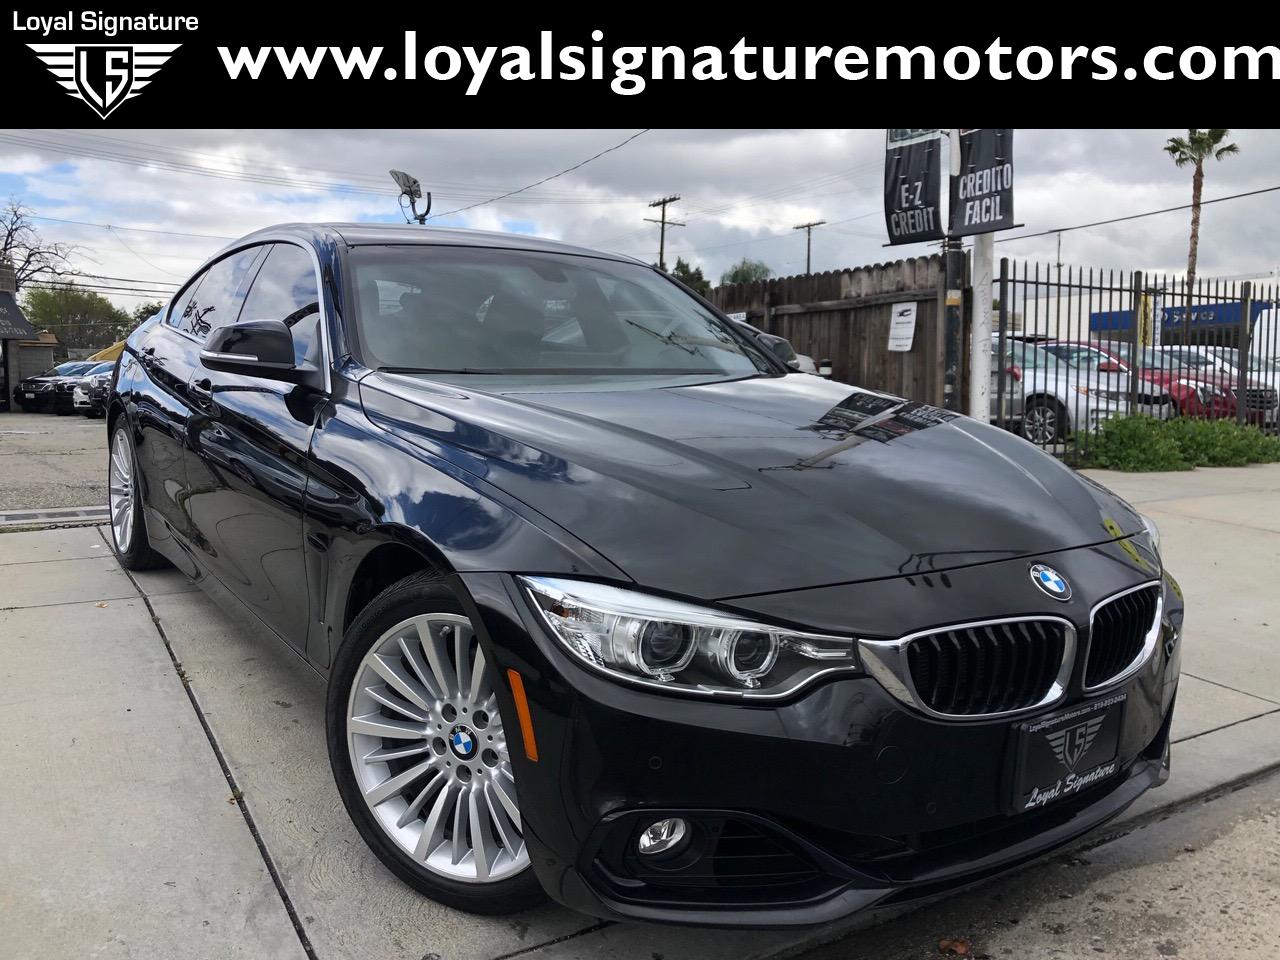 Used 2016 Bmw 4 Series 428i Gran Coupe For Sale 20 995